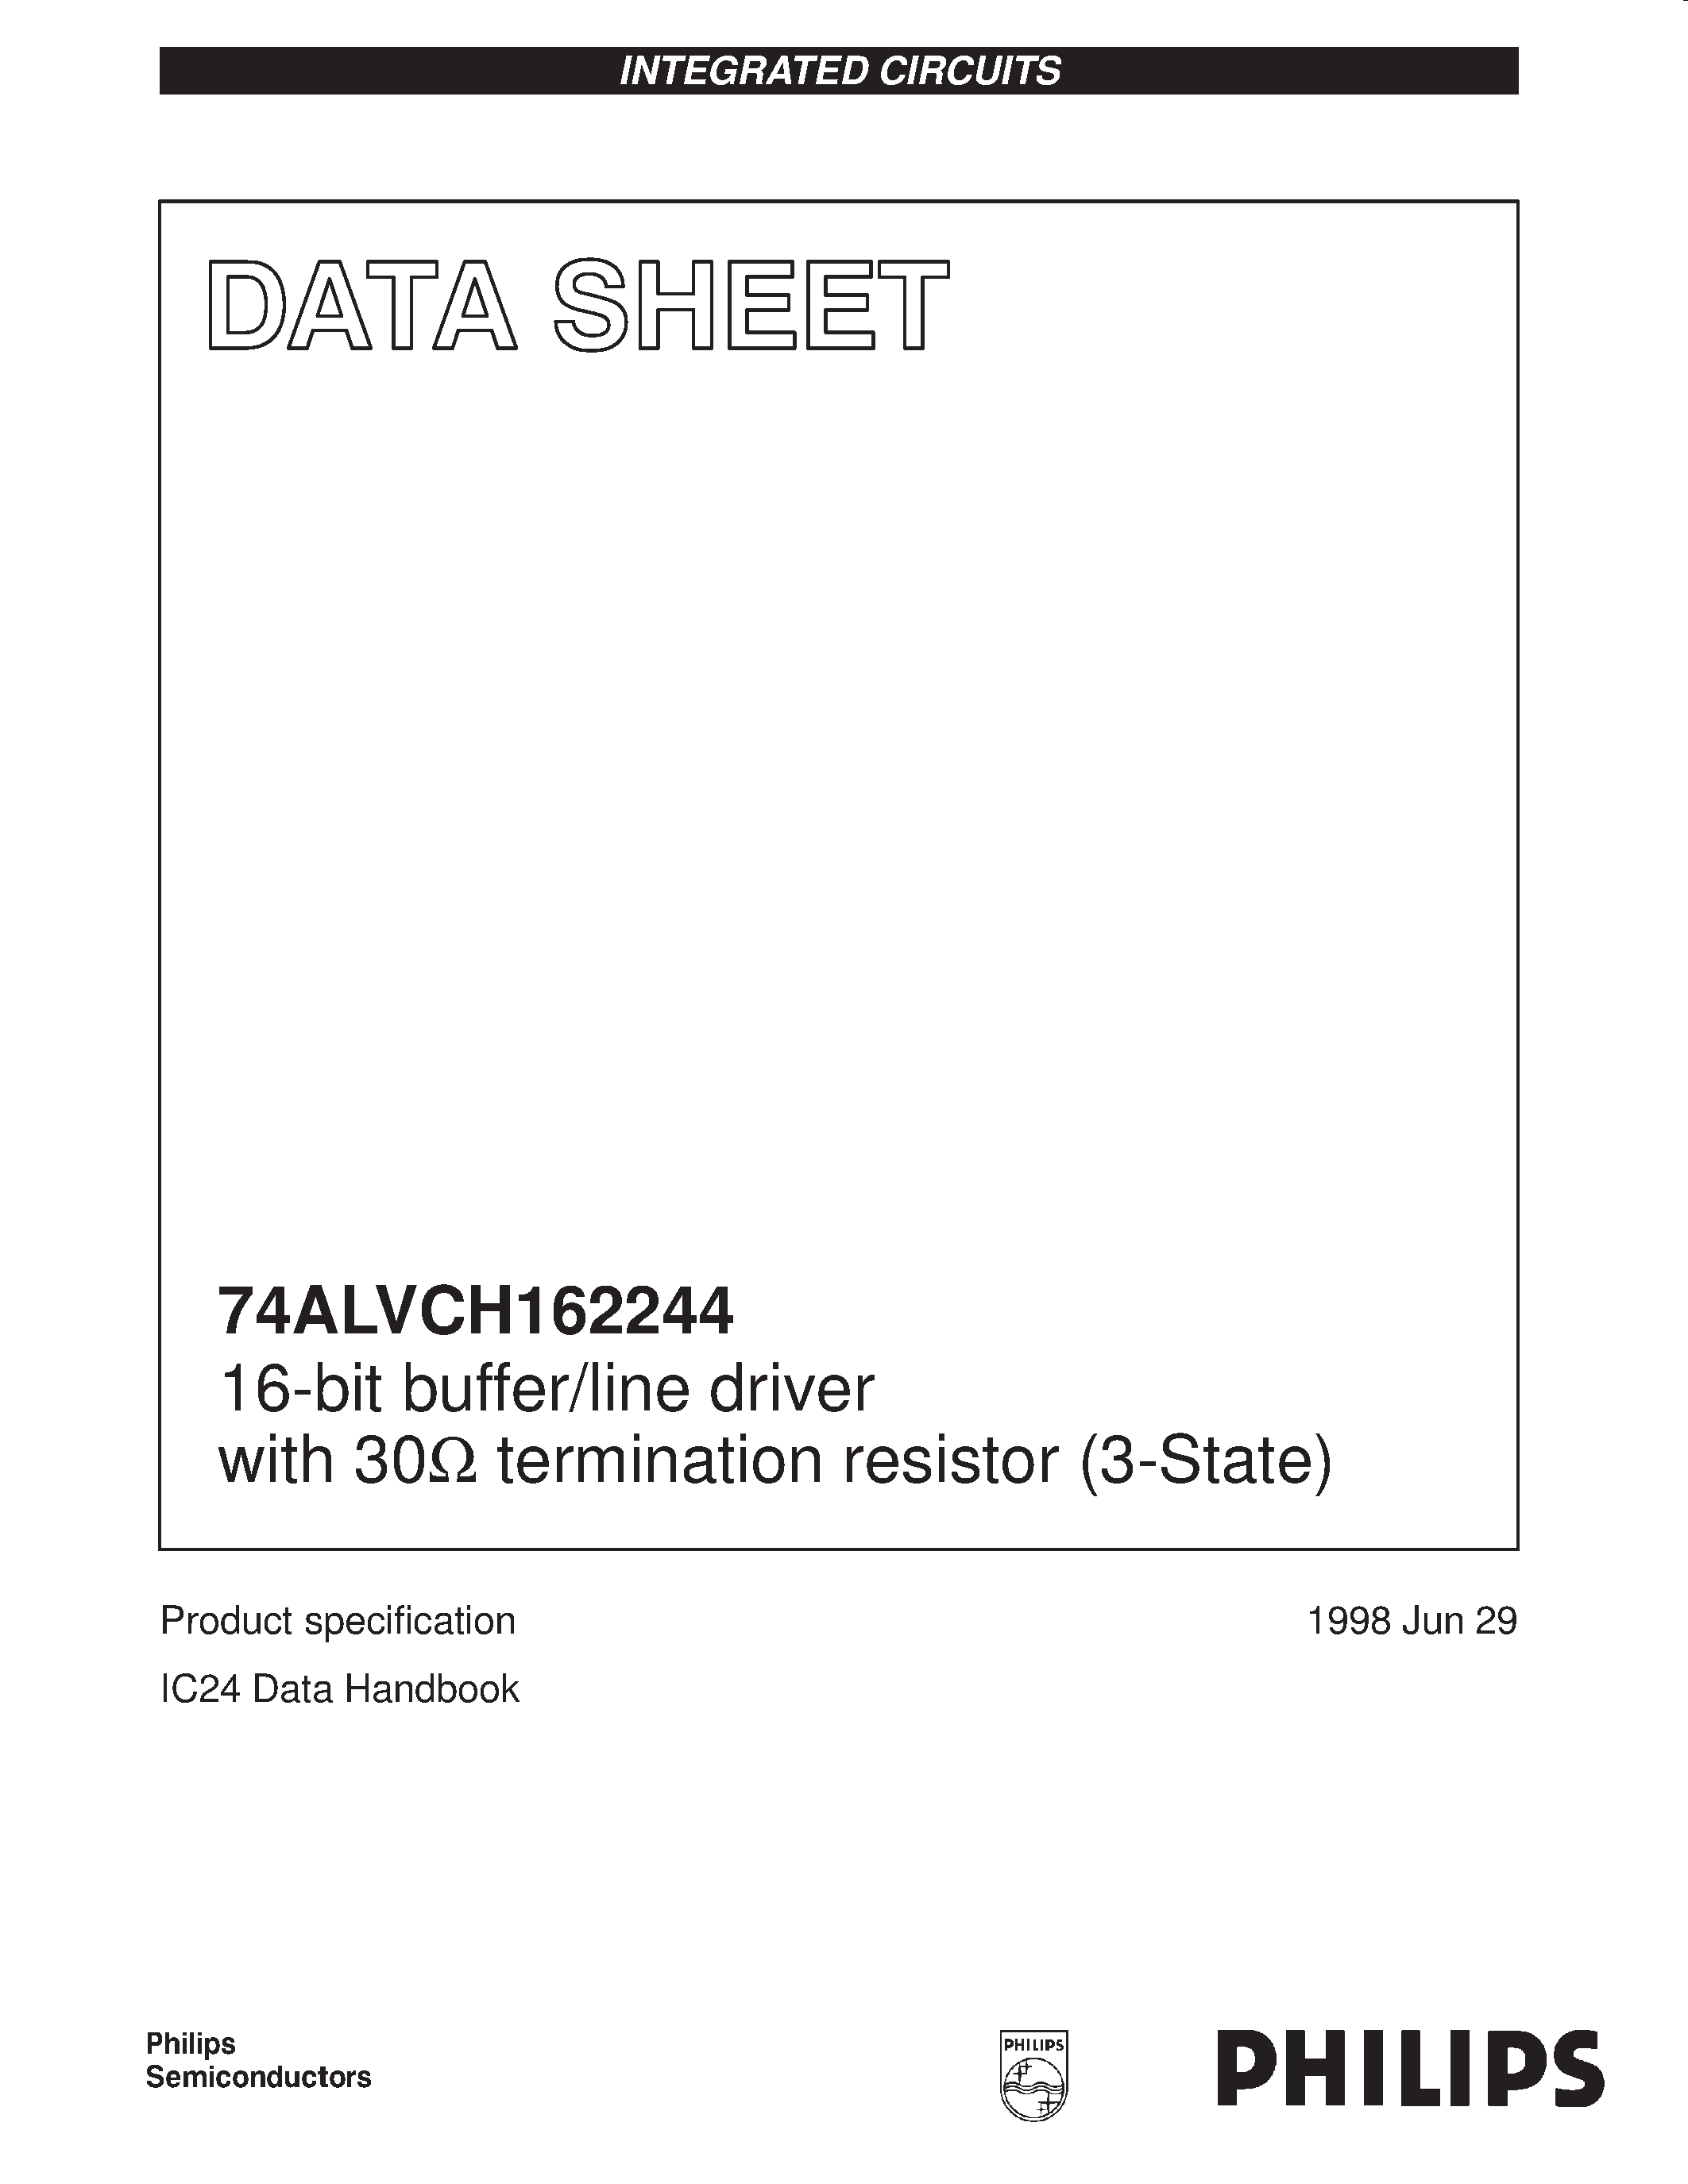 Datasheet 74ALVCH162244DL - 16-bit buffer/line driver with 30ohm termination resistor 3-State page 1